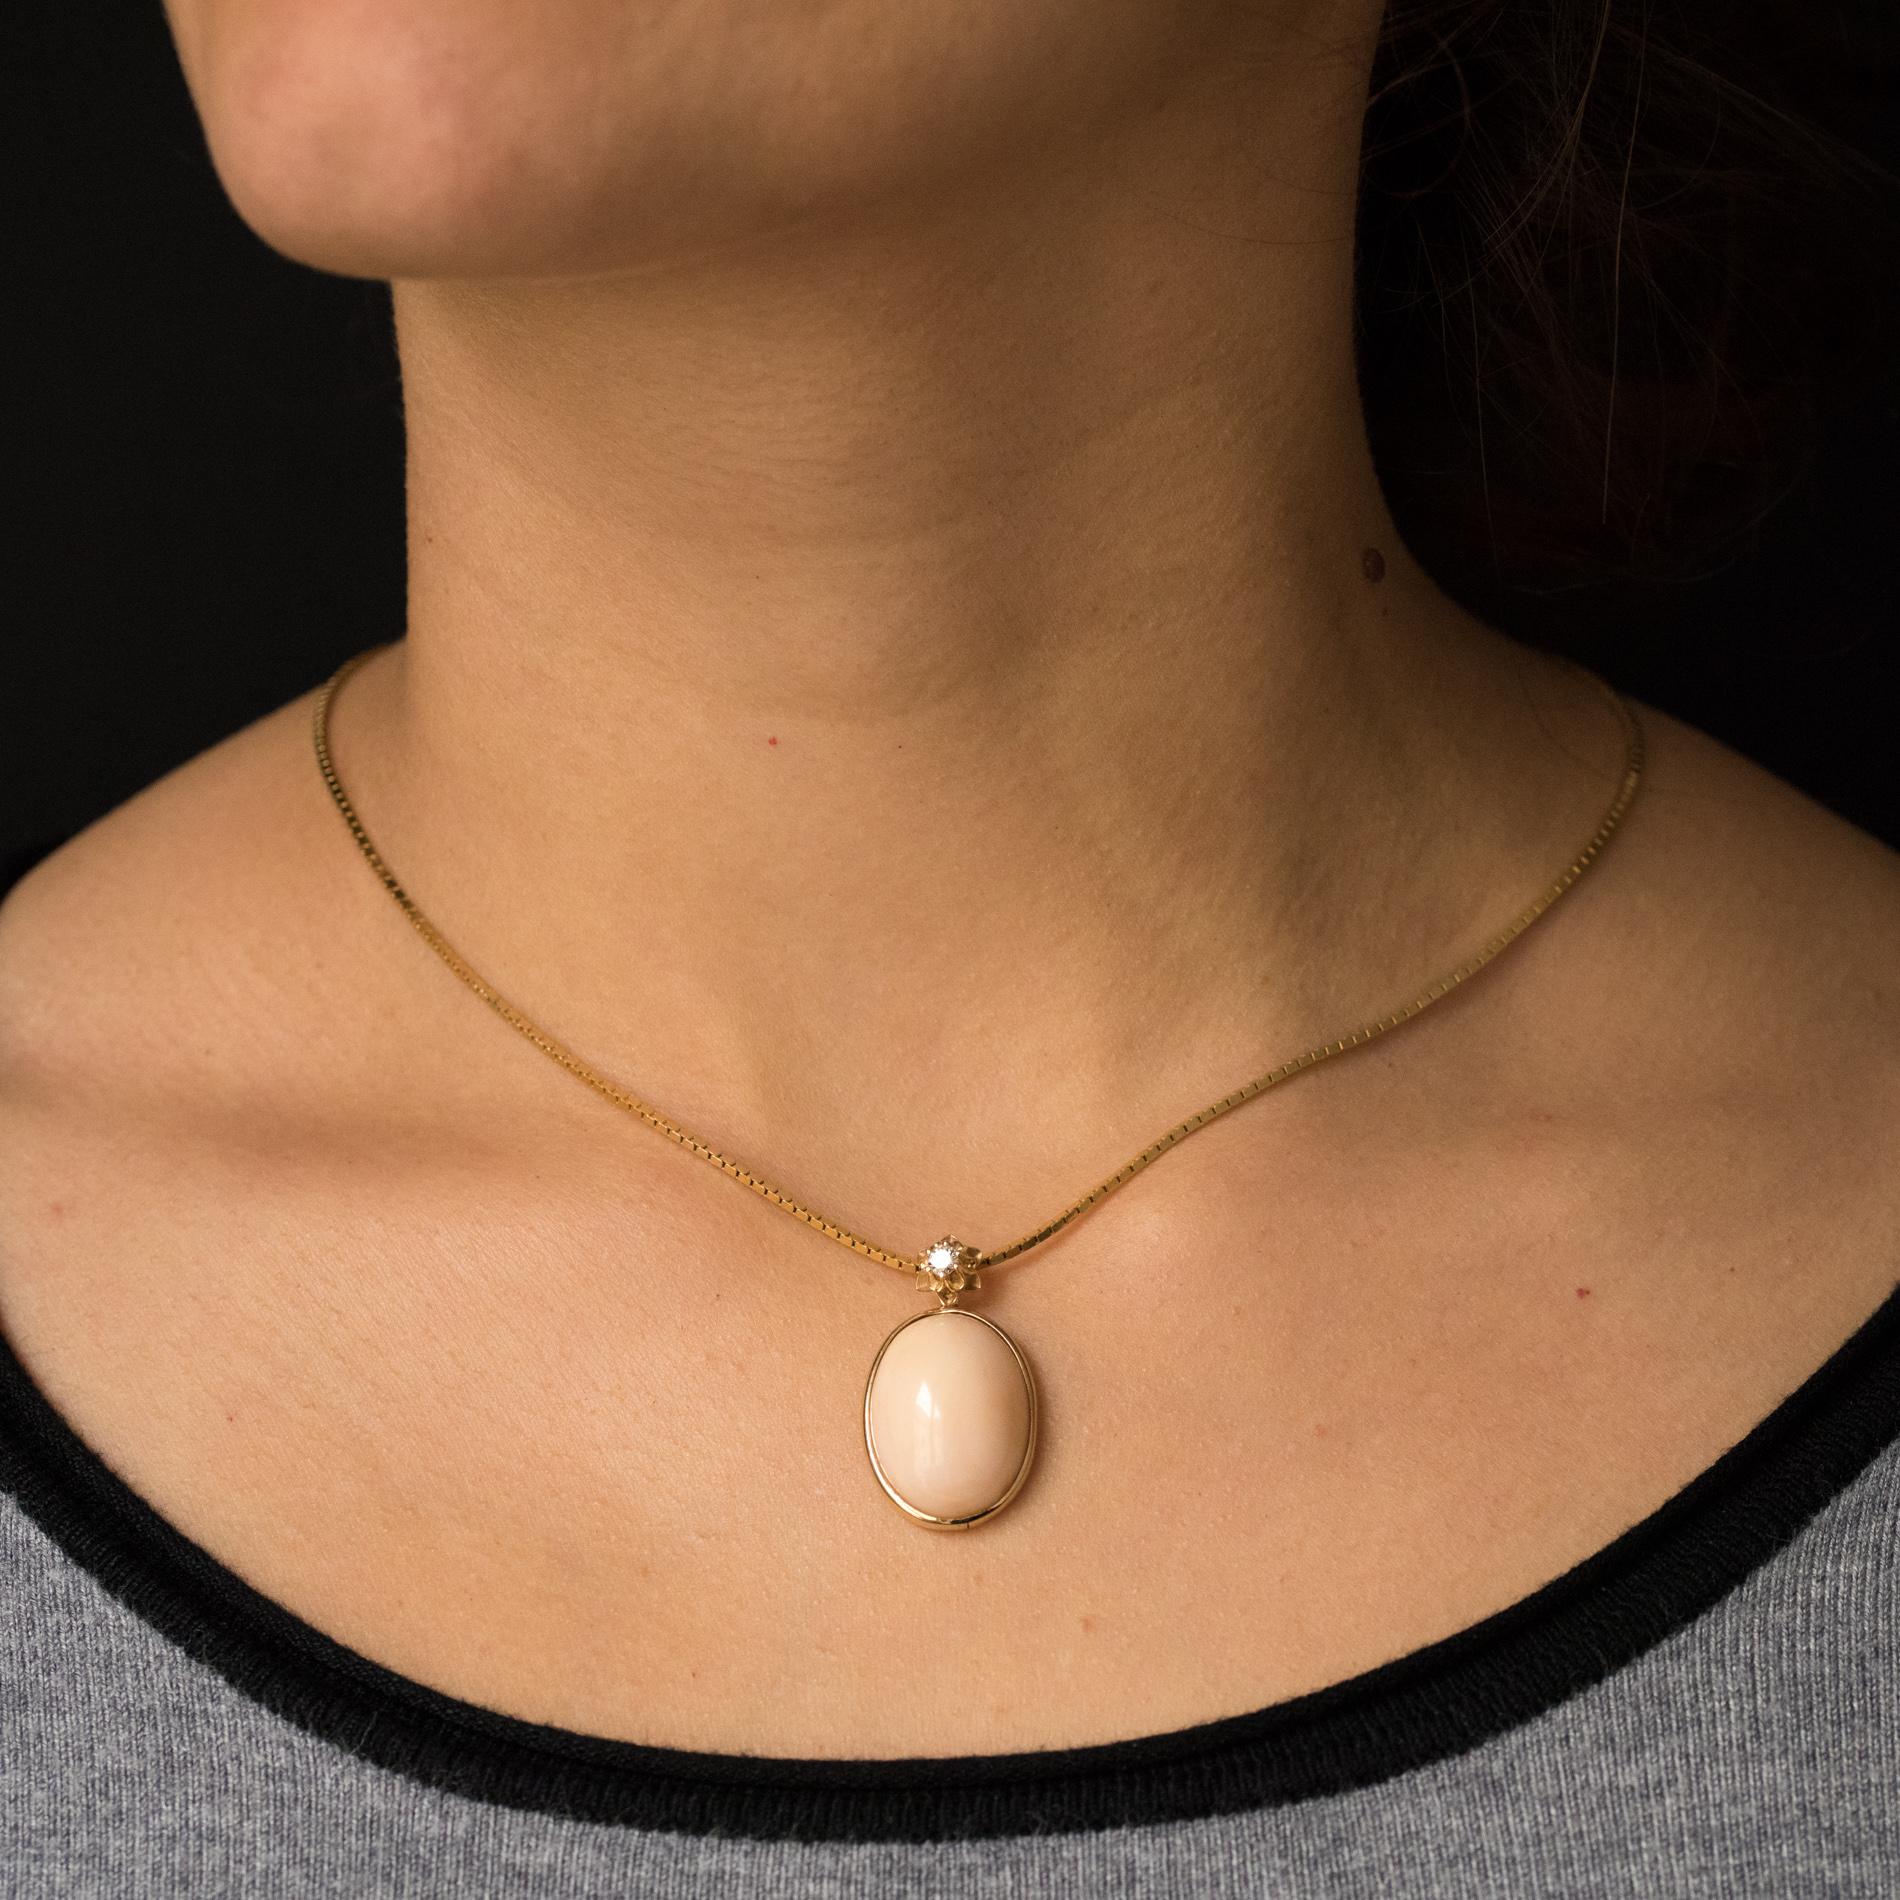 Pendant in 14 karats yellow gold pendant, shell hallmark.
Oval shaped, this elegant retro pendant is set with a cabochon of pink coral said 